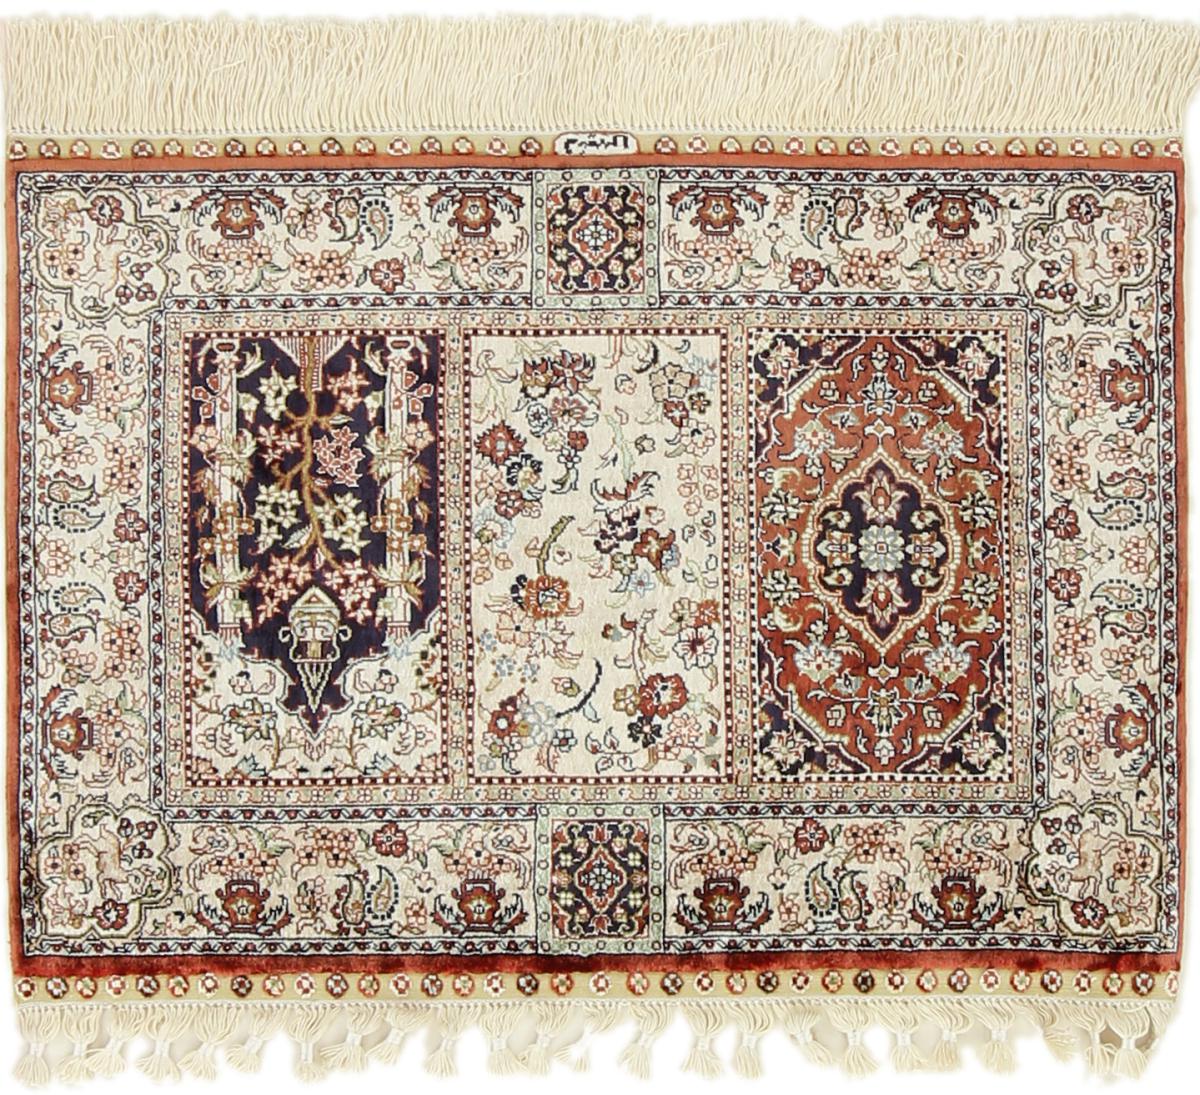 Chinese rug Hereke Silk 45x63 45x63, Persian Rug Knotted by hand